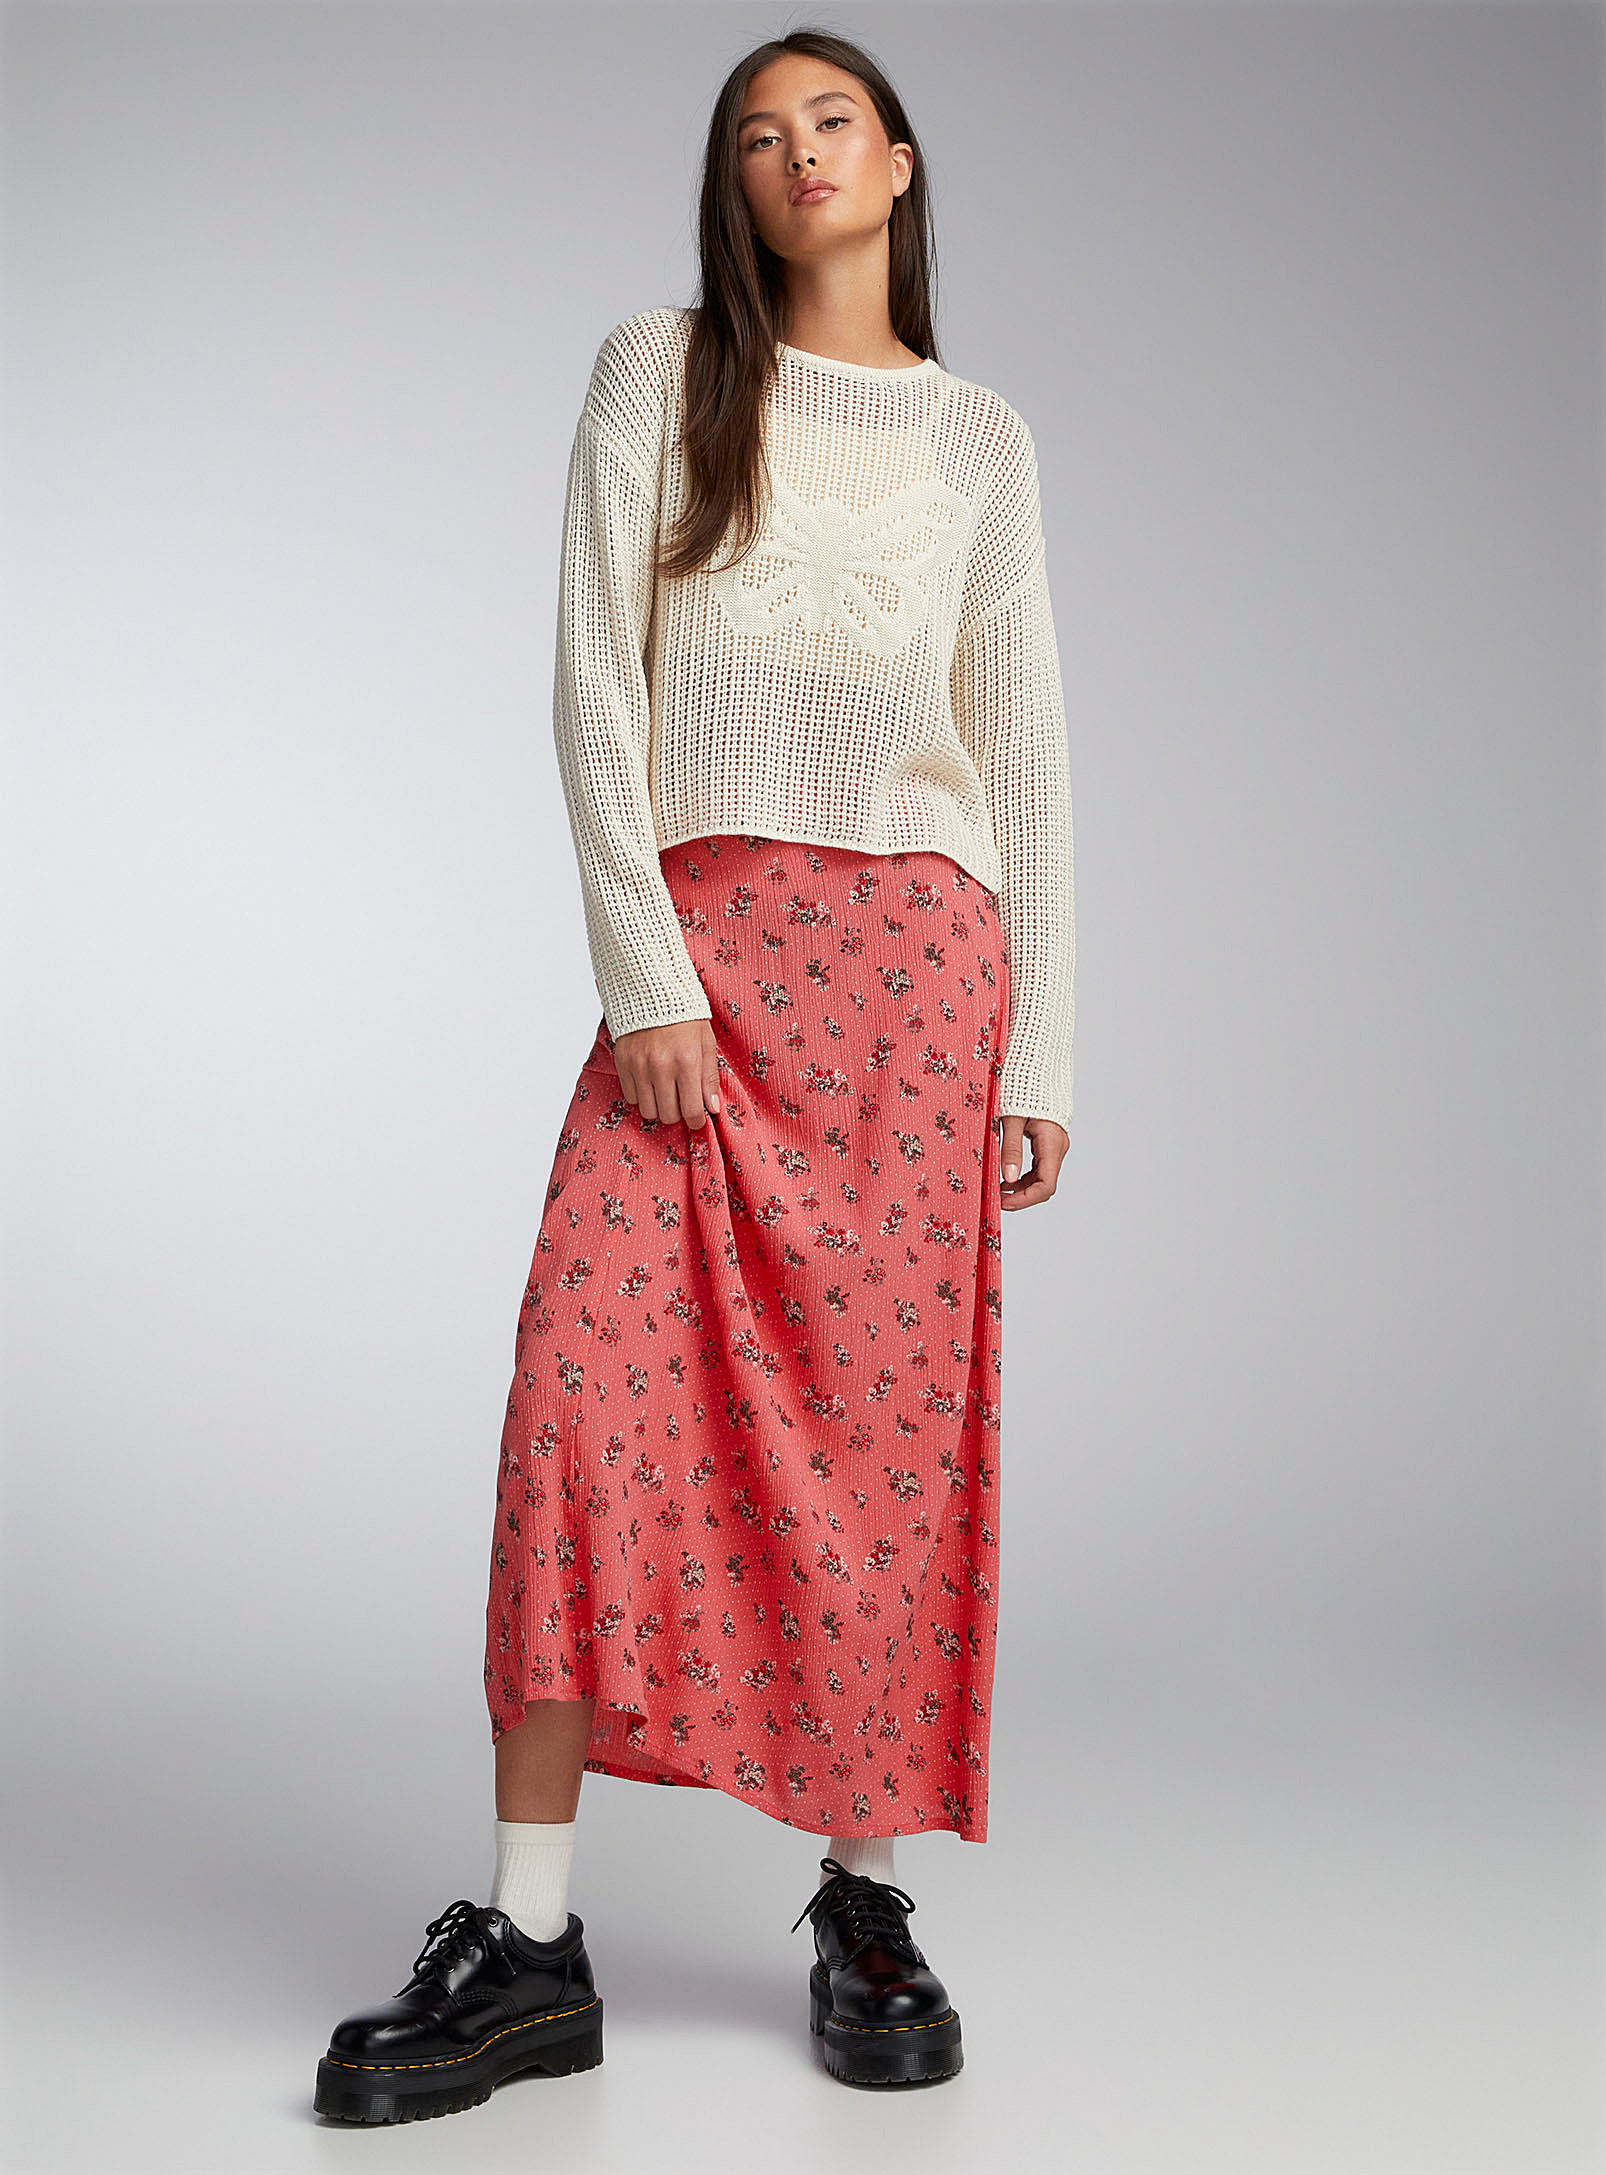 Twik Textured Crepe Long Slit Skirt In Patterned Red